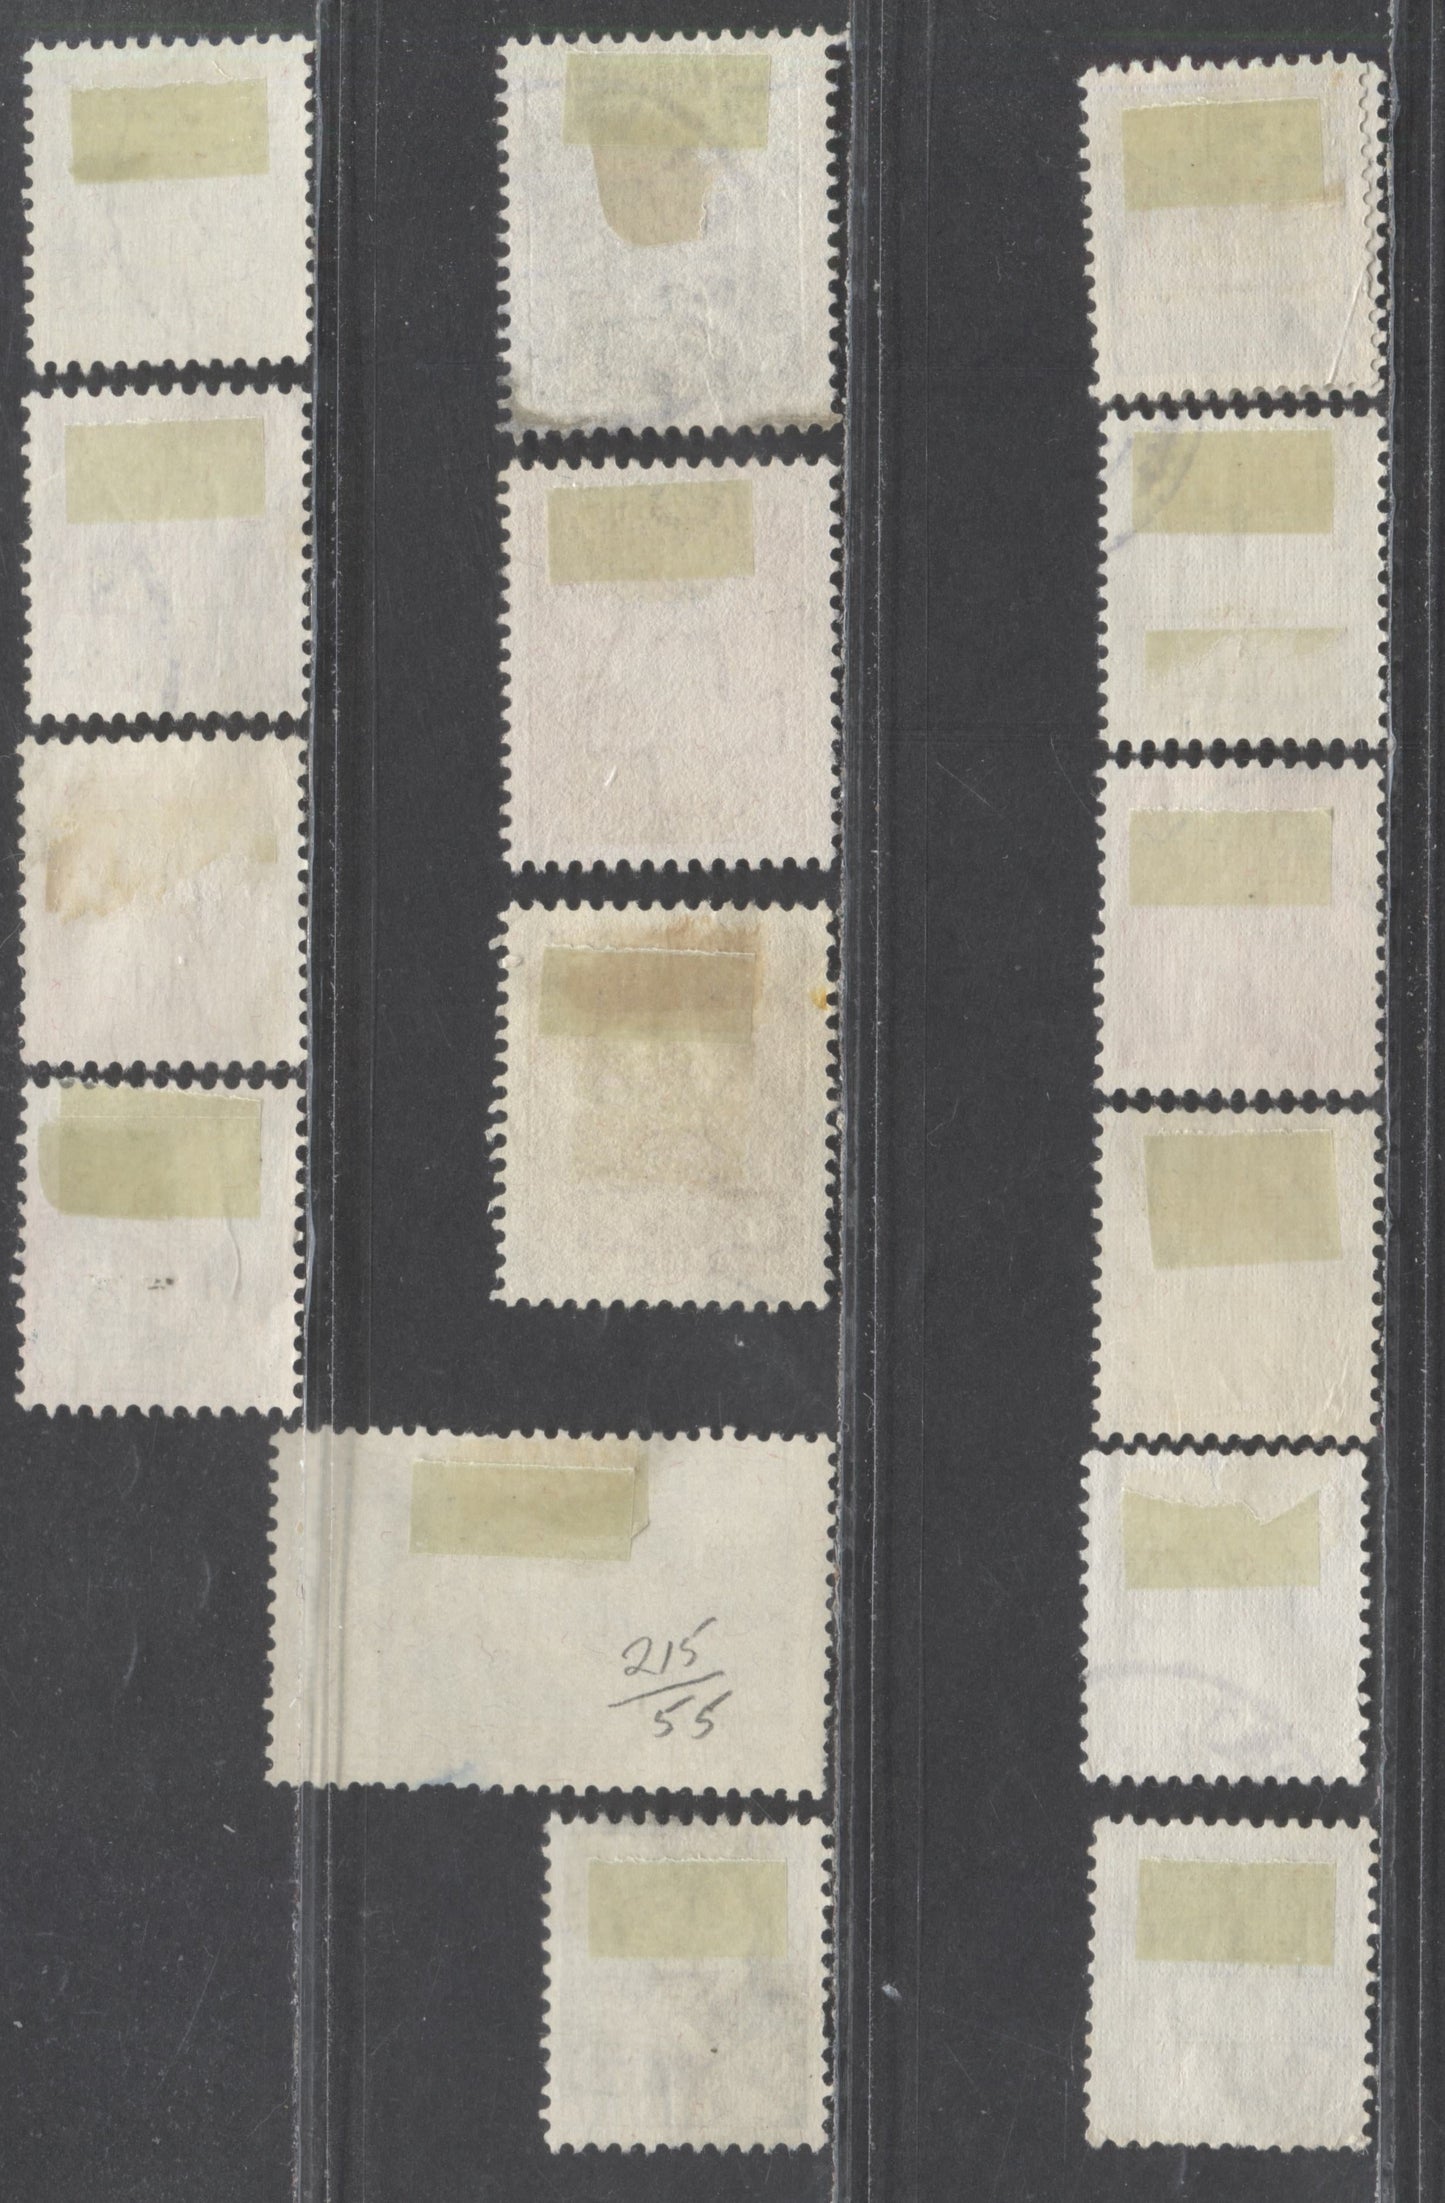 Lot 295 Switzerland SC#210-225 1932-1934 Commemoratives & Definitives, 16 Very Fine Used Singles, Click on Listing to See ALL Pictures, 2022 Scott Classic Cat. $37.65 USD